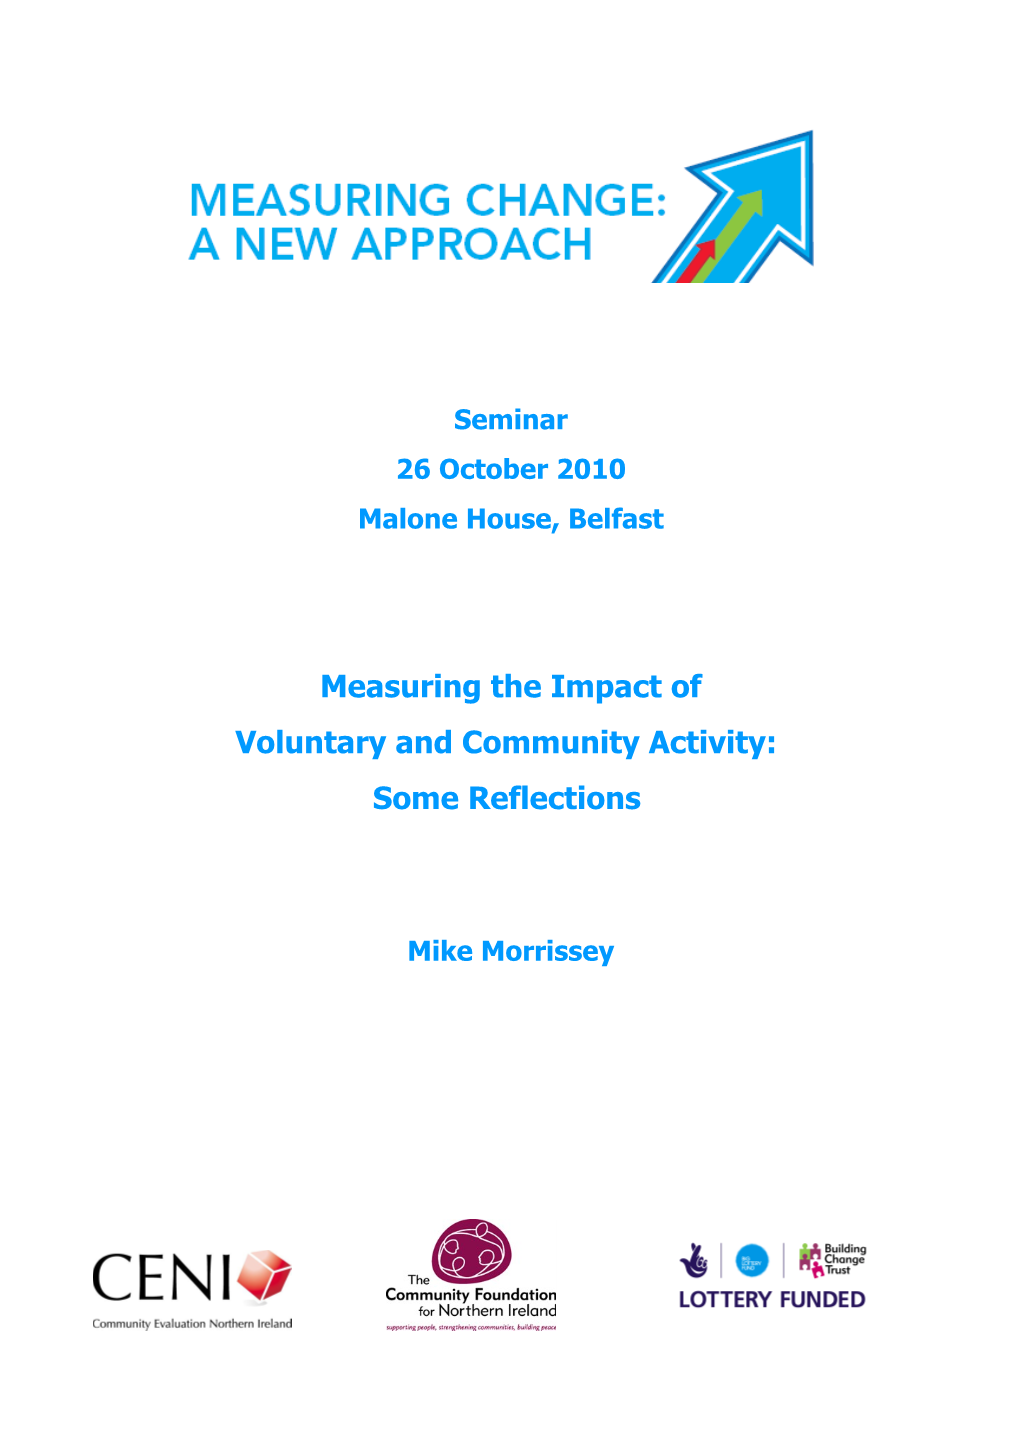 Measuring the Impact of Voluntary and Community Activity: Some Reflections